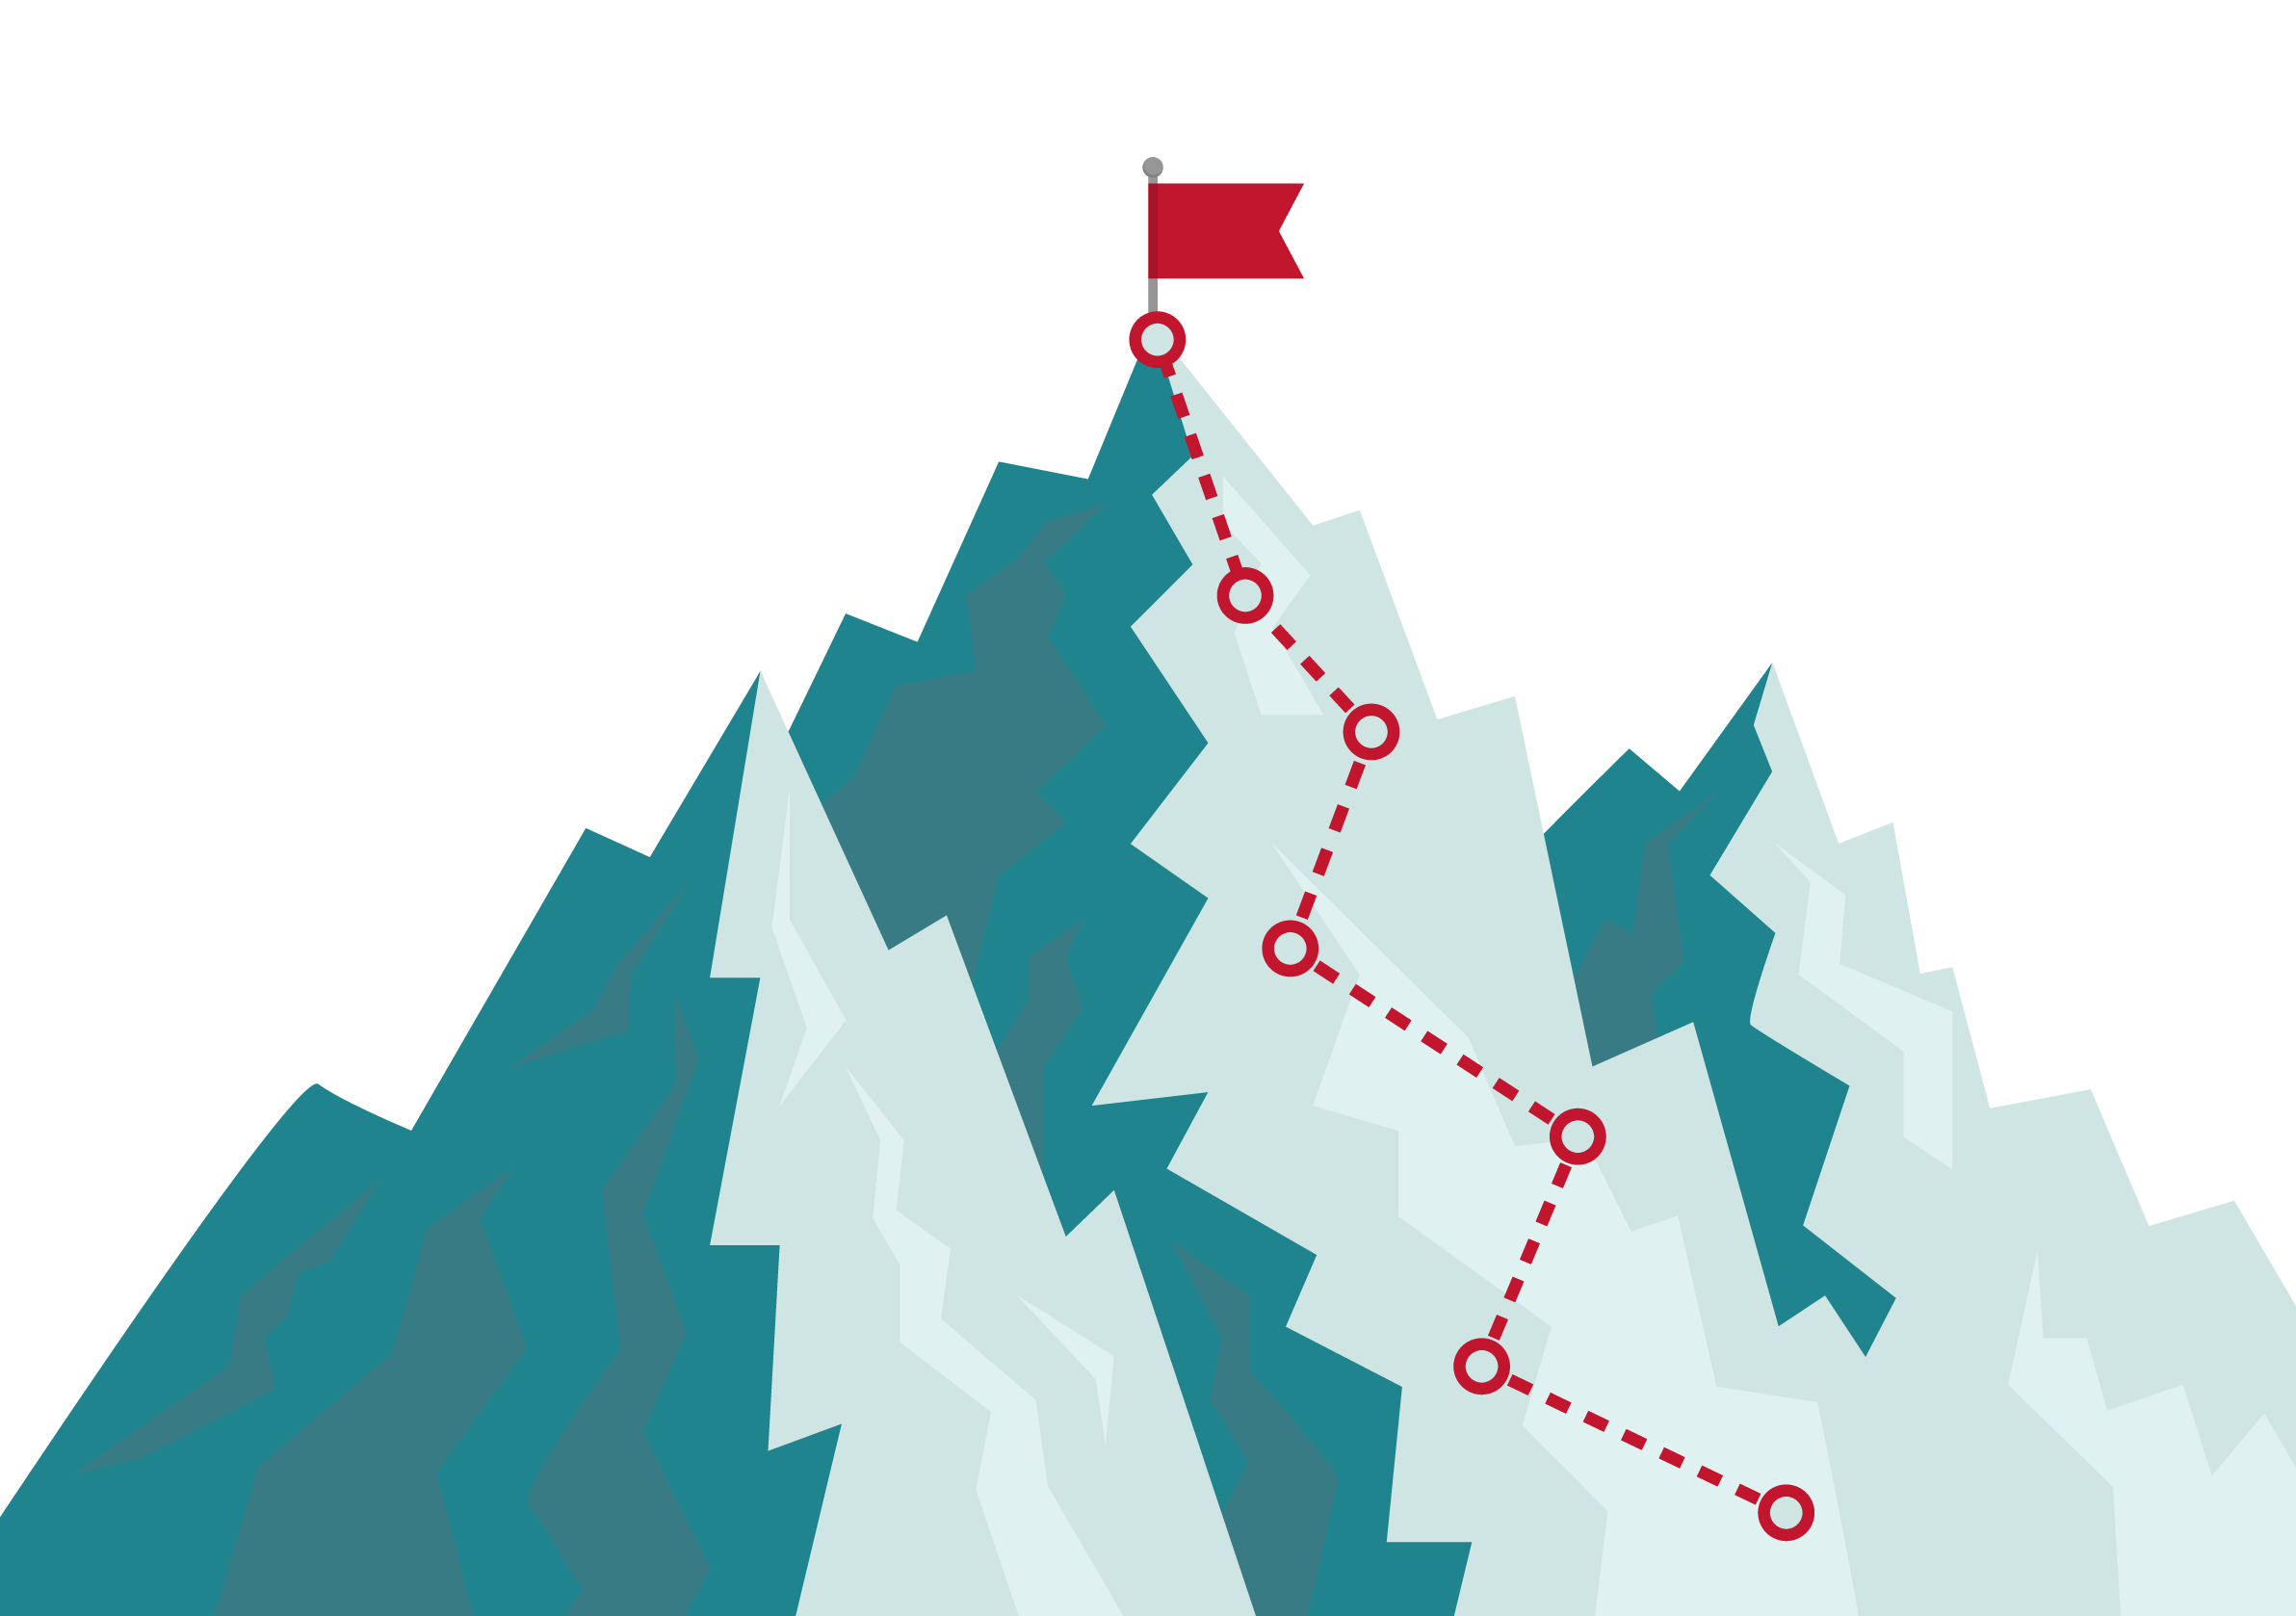 Zig-zag line going up the side of a mountain, ending at a flag perched on the mountain's peak.